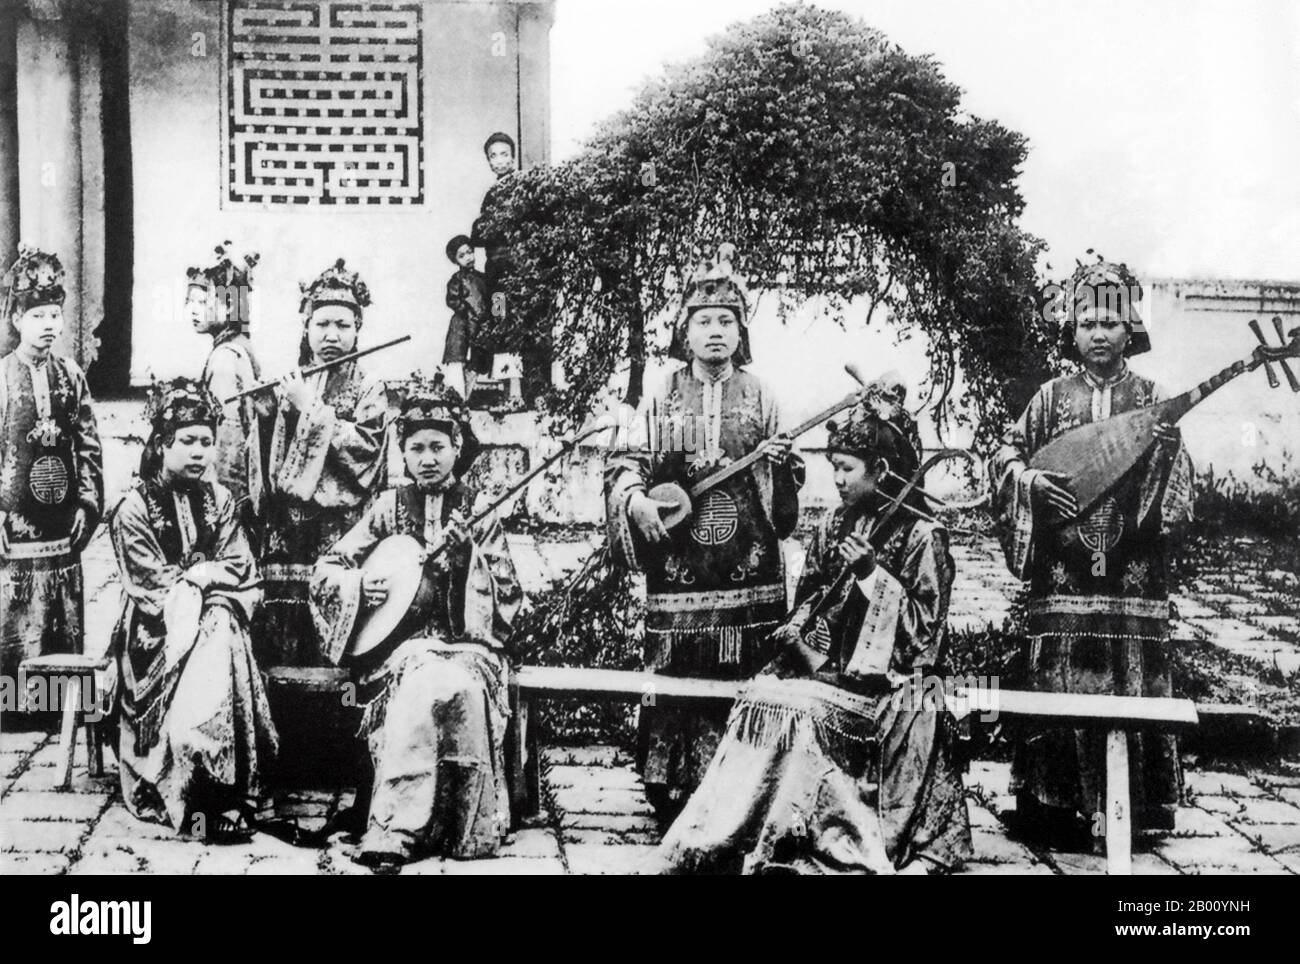 Vietnam: A royal orchestra of women at Hue (early 20th century).  Between 1802 and 1945, Hue was the imperial capital of the Nguyen Dynasty, a feudal kingdom which dominated much of southern Vietnam from the 17th to the 19th century. In 1775 when Trinh Sam captured it, it was known as Phu Xuan. In 1802, Nguyen Phuc Anh (later Emperor Gia Long) succeeded in establishing his control over the whole of Vietnam, thereby making Hue the national capital until 1945, when Emperor Bao Dai abdicated and a communist government was established in Hanoi. Stock Photo